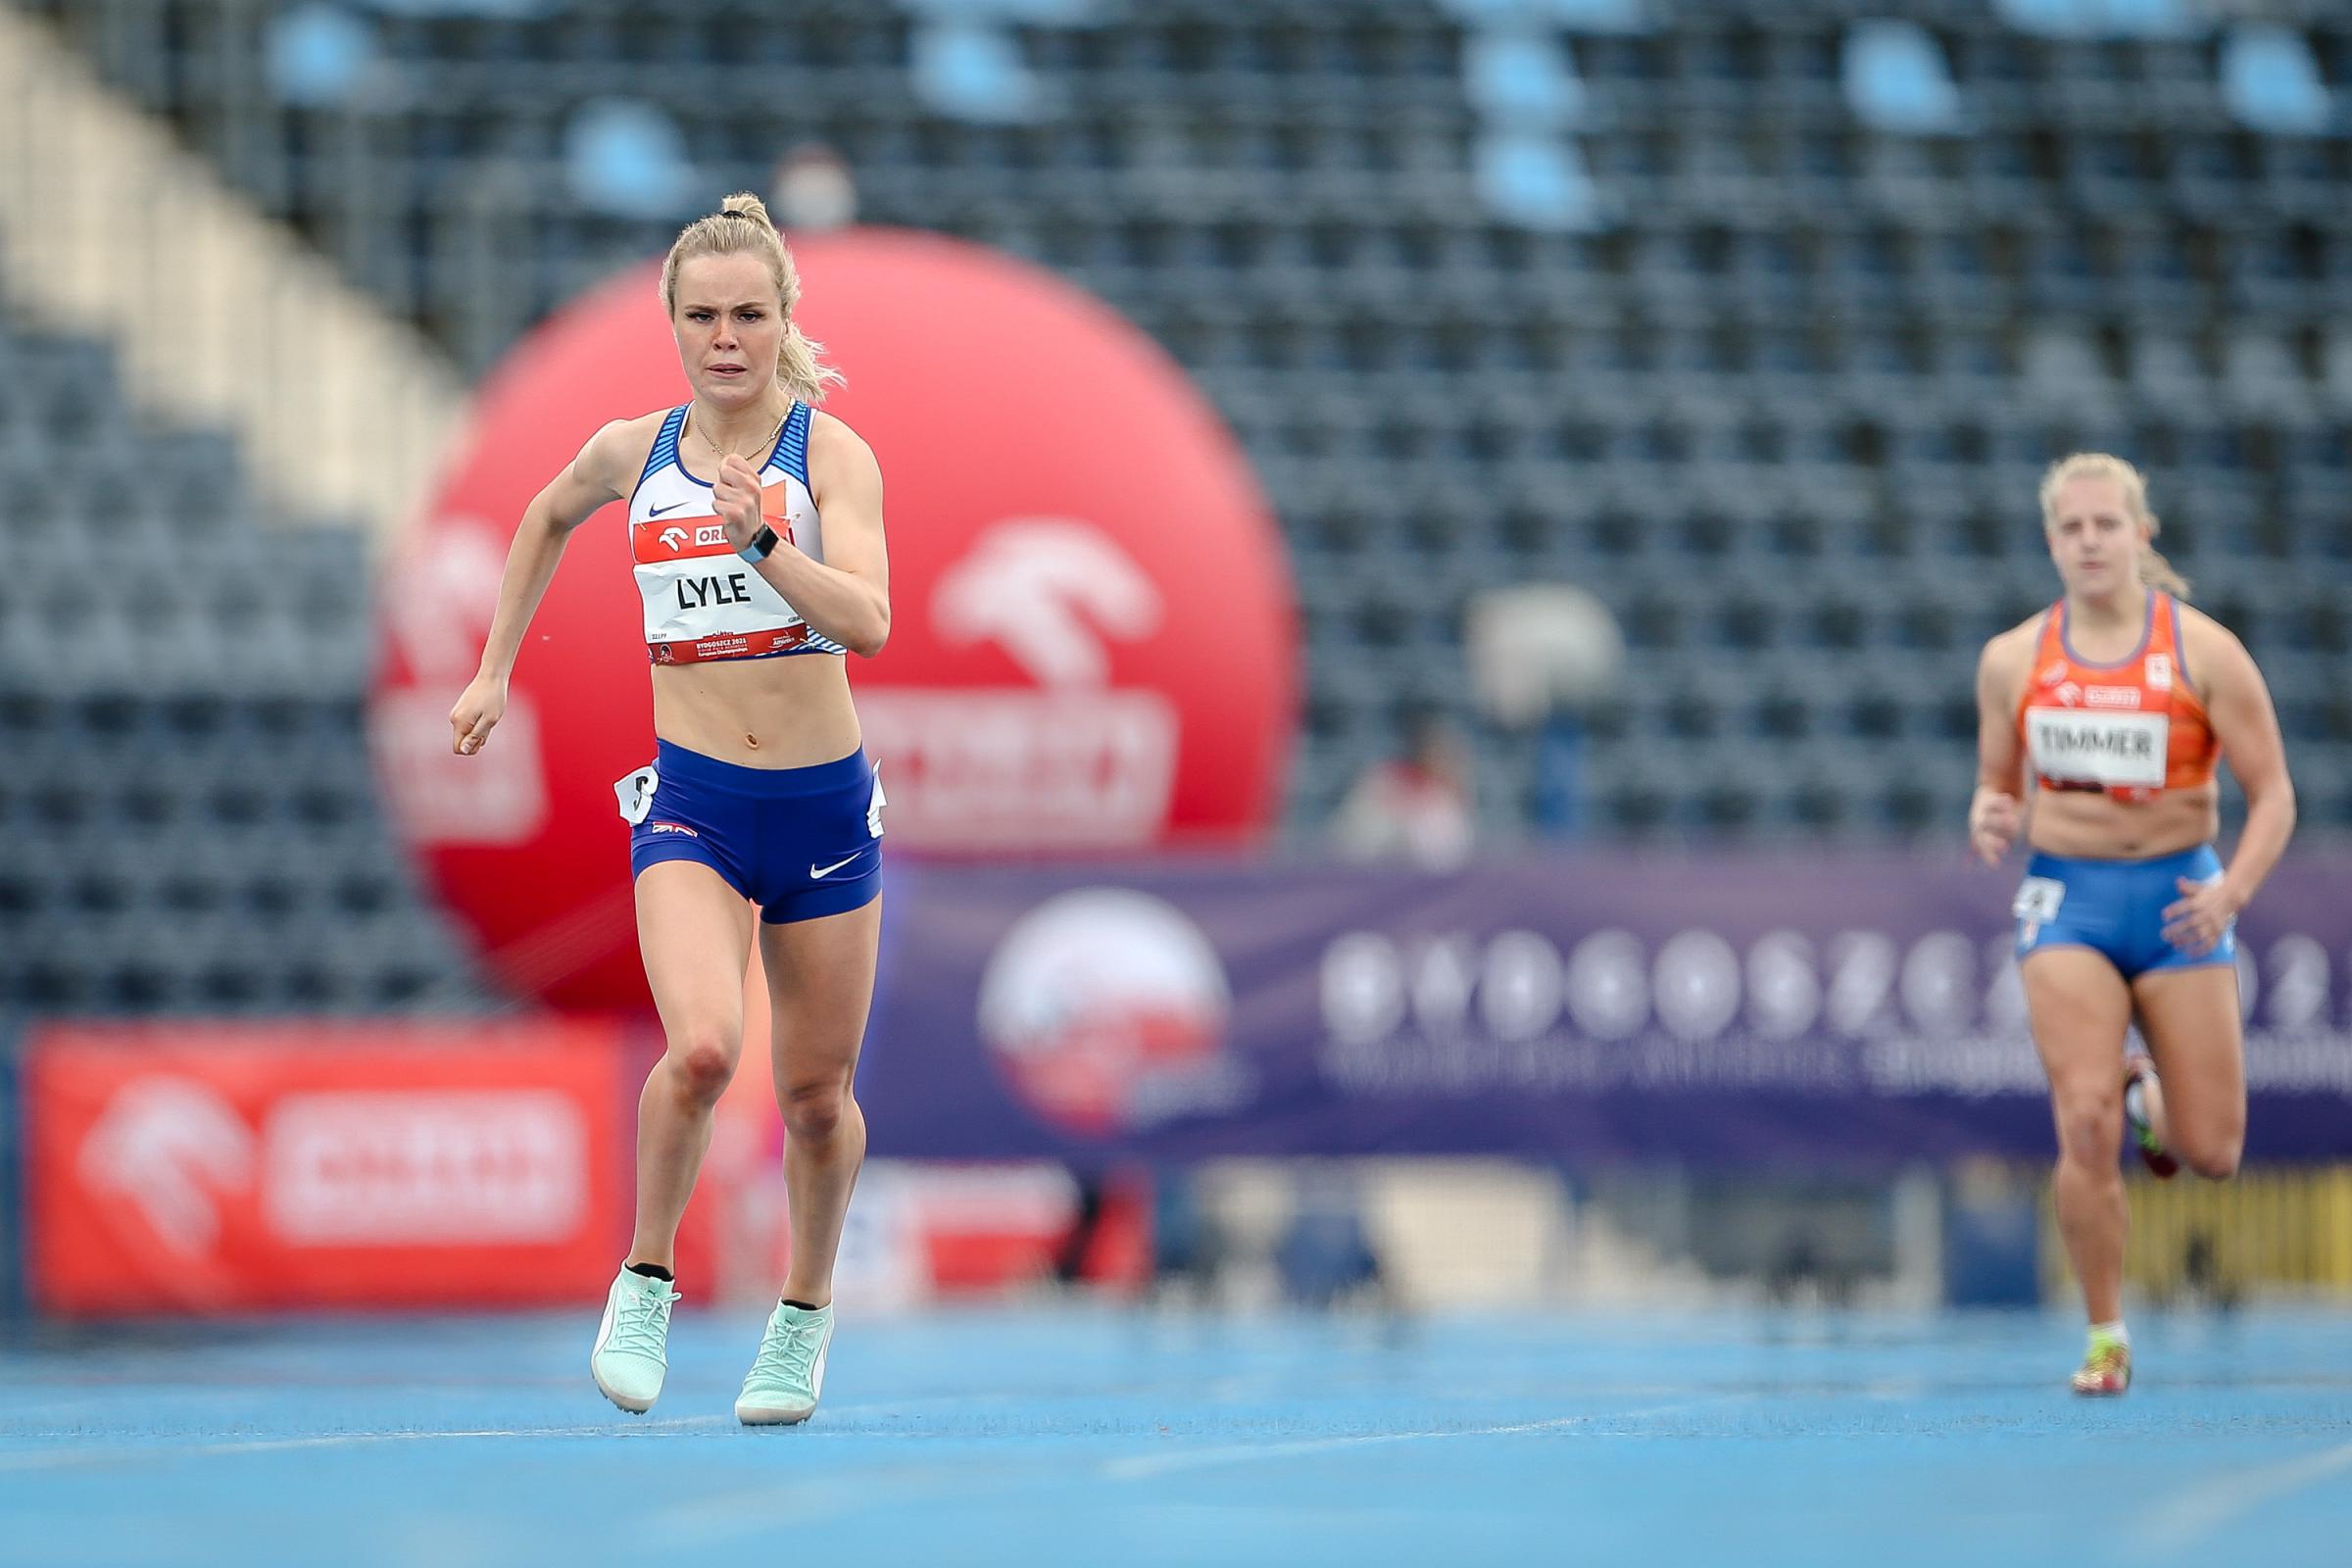 Maria Lyle on her way to scooping gold medal number seven at the World Para Athletics European Championships in Poland. Picture: IPC/Tadeusz Skwiot